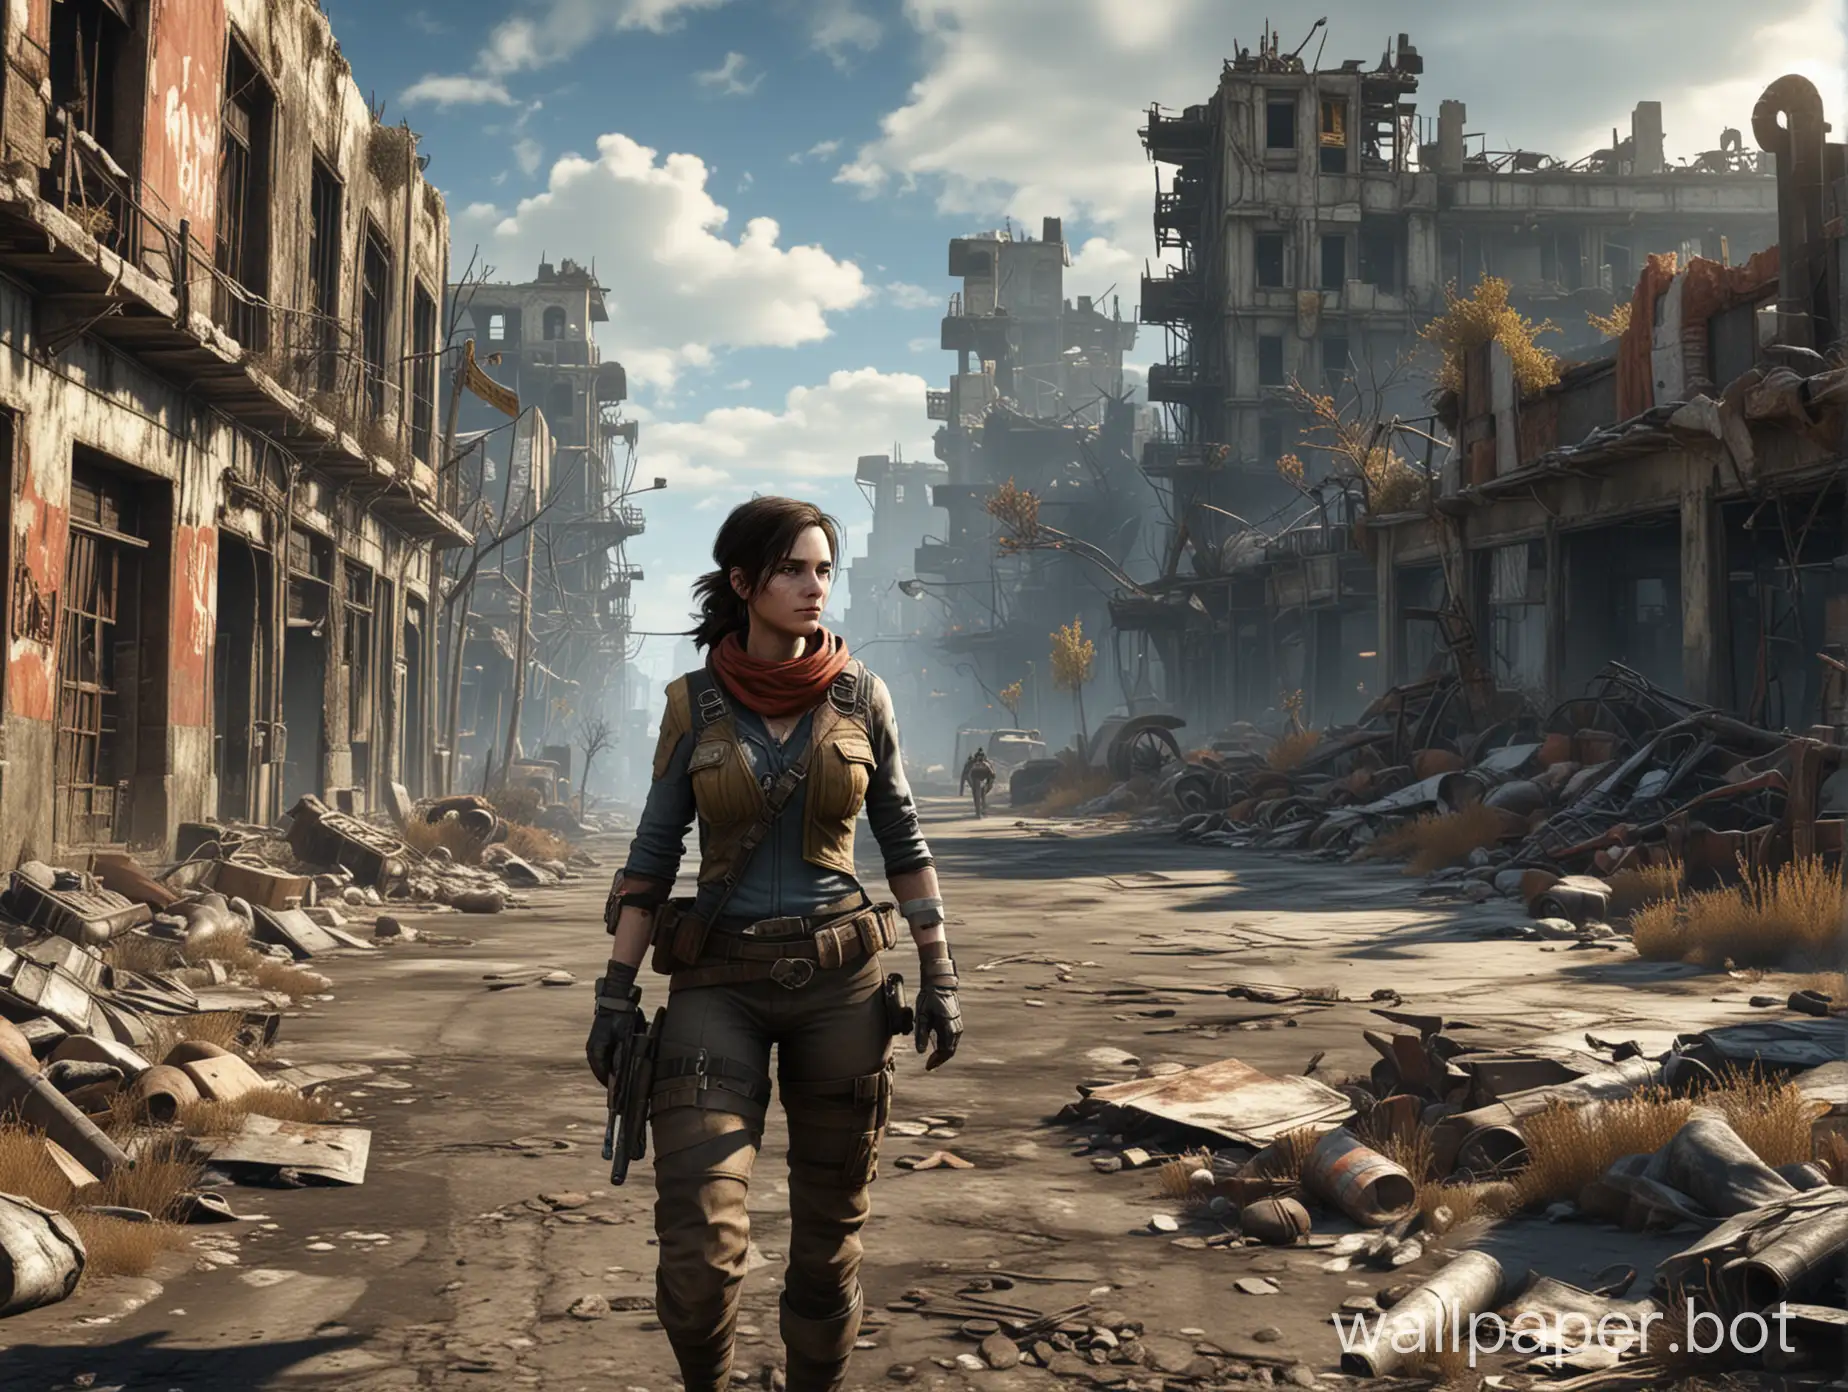 Journalist Piper from the Fallout game walks along the street of the ruined city.